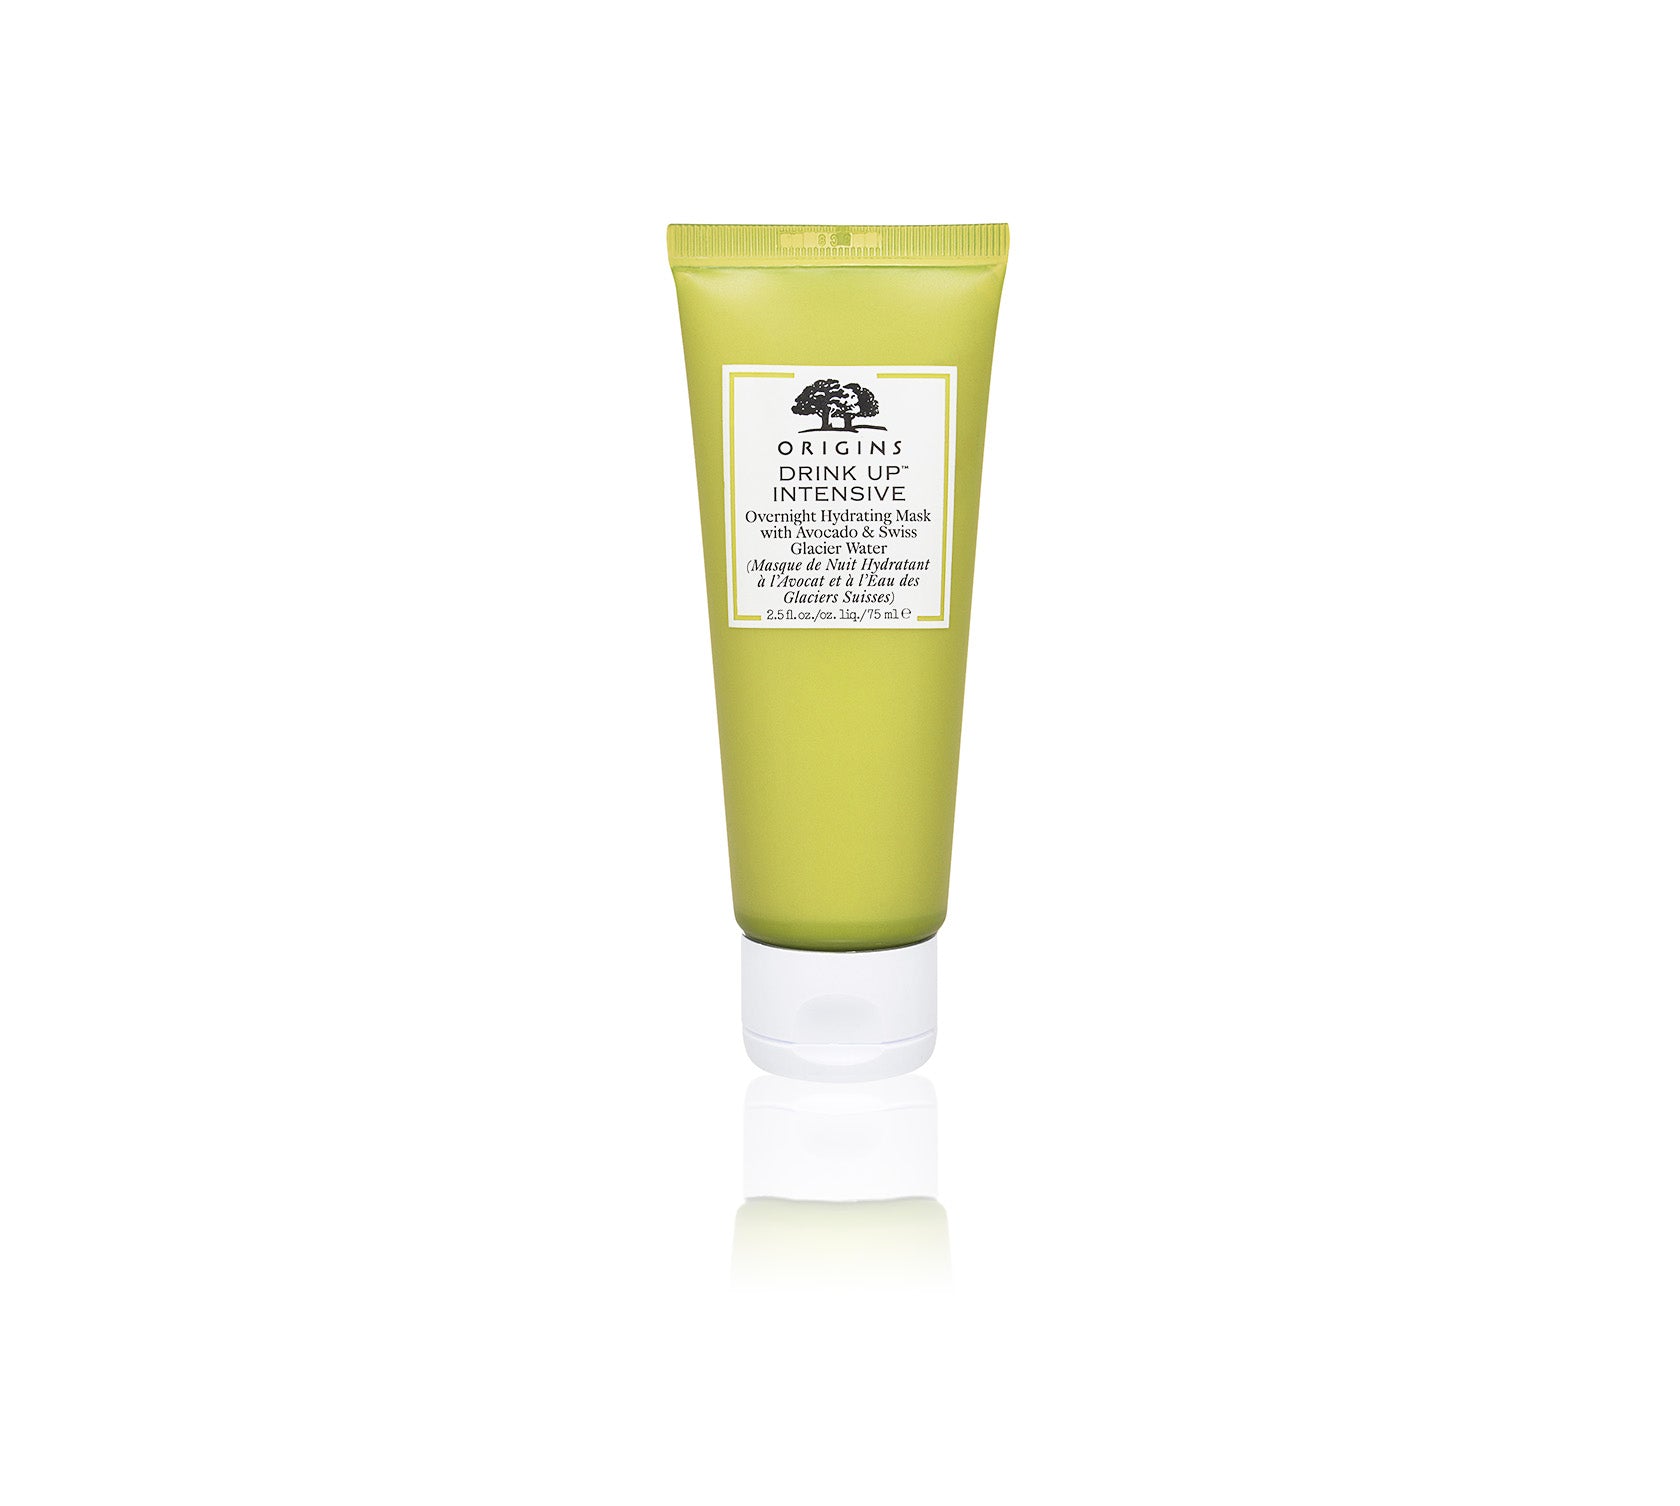 Drink Up Intensive Overnight Hydrating Mask With Avocado & Swiss Glaci